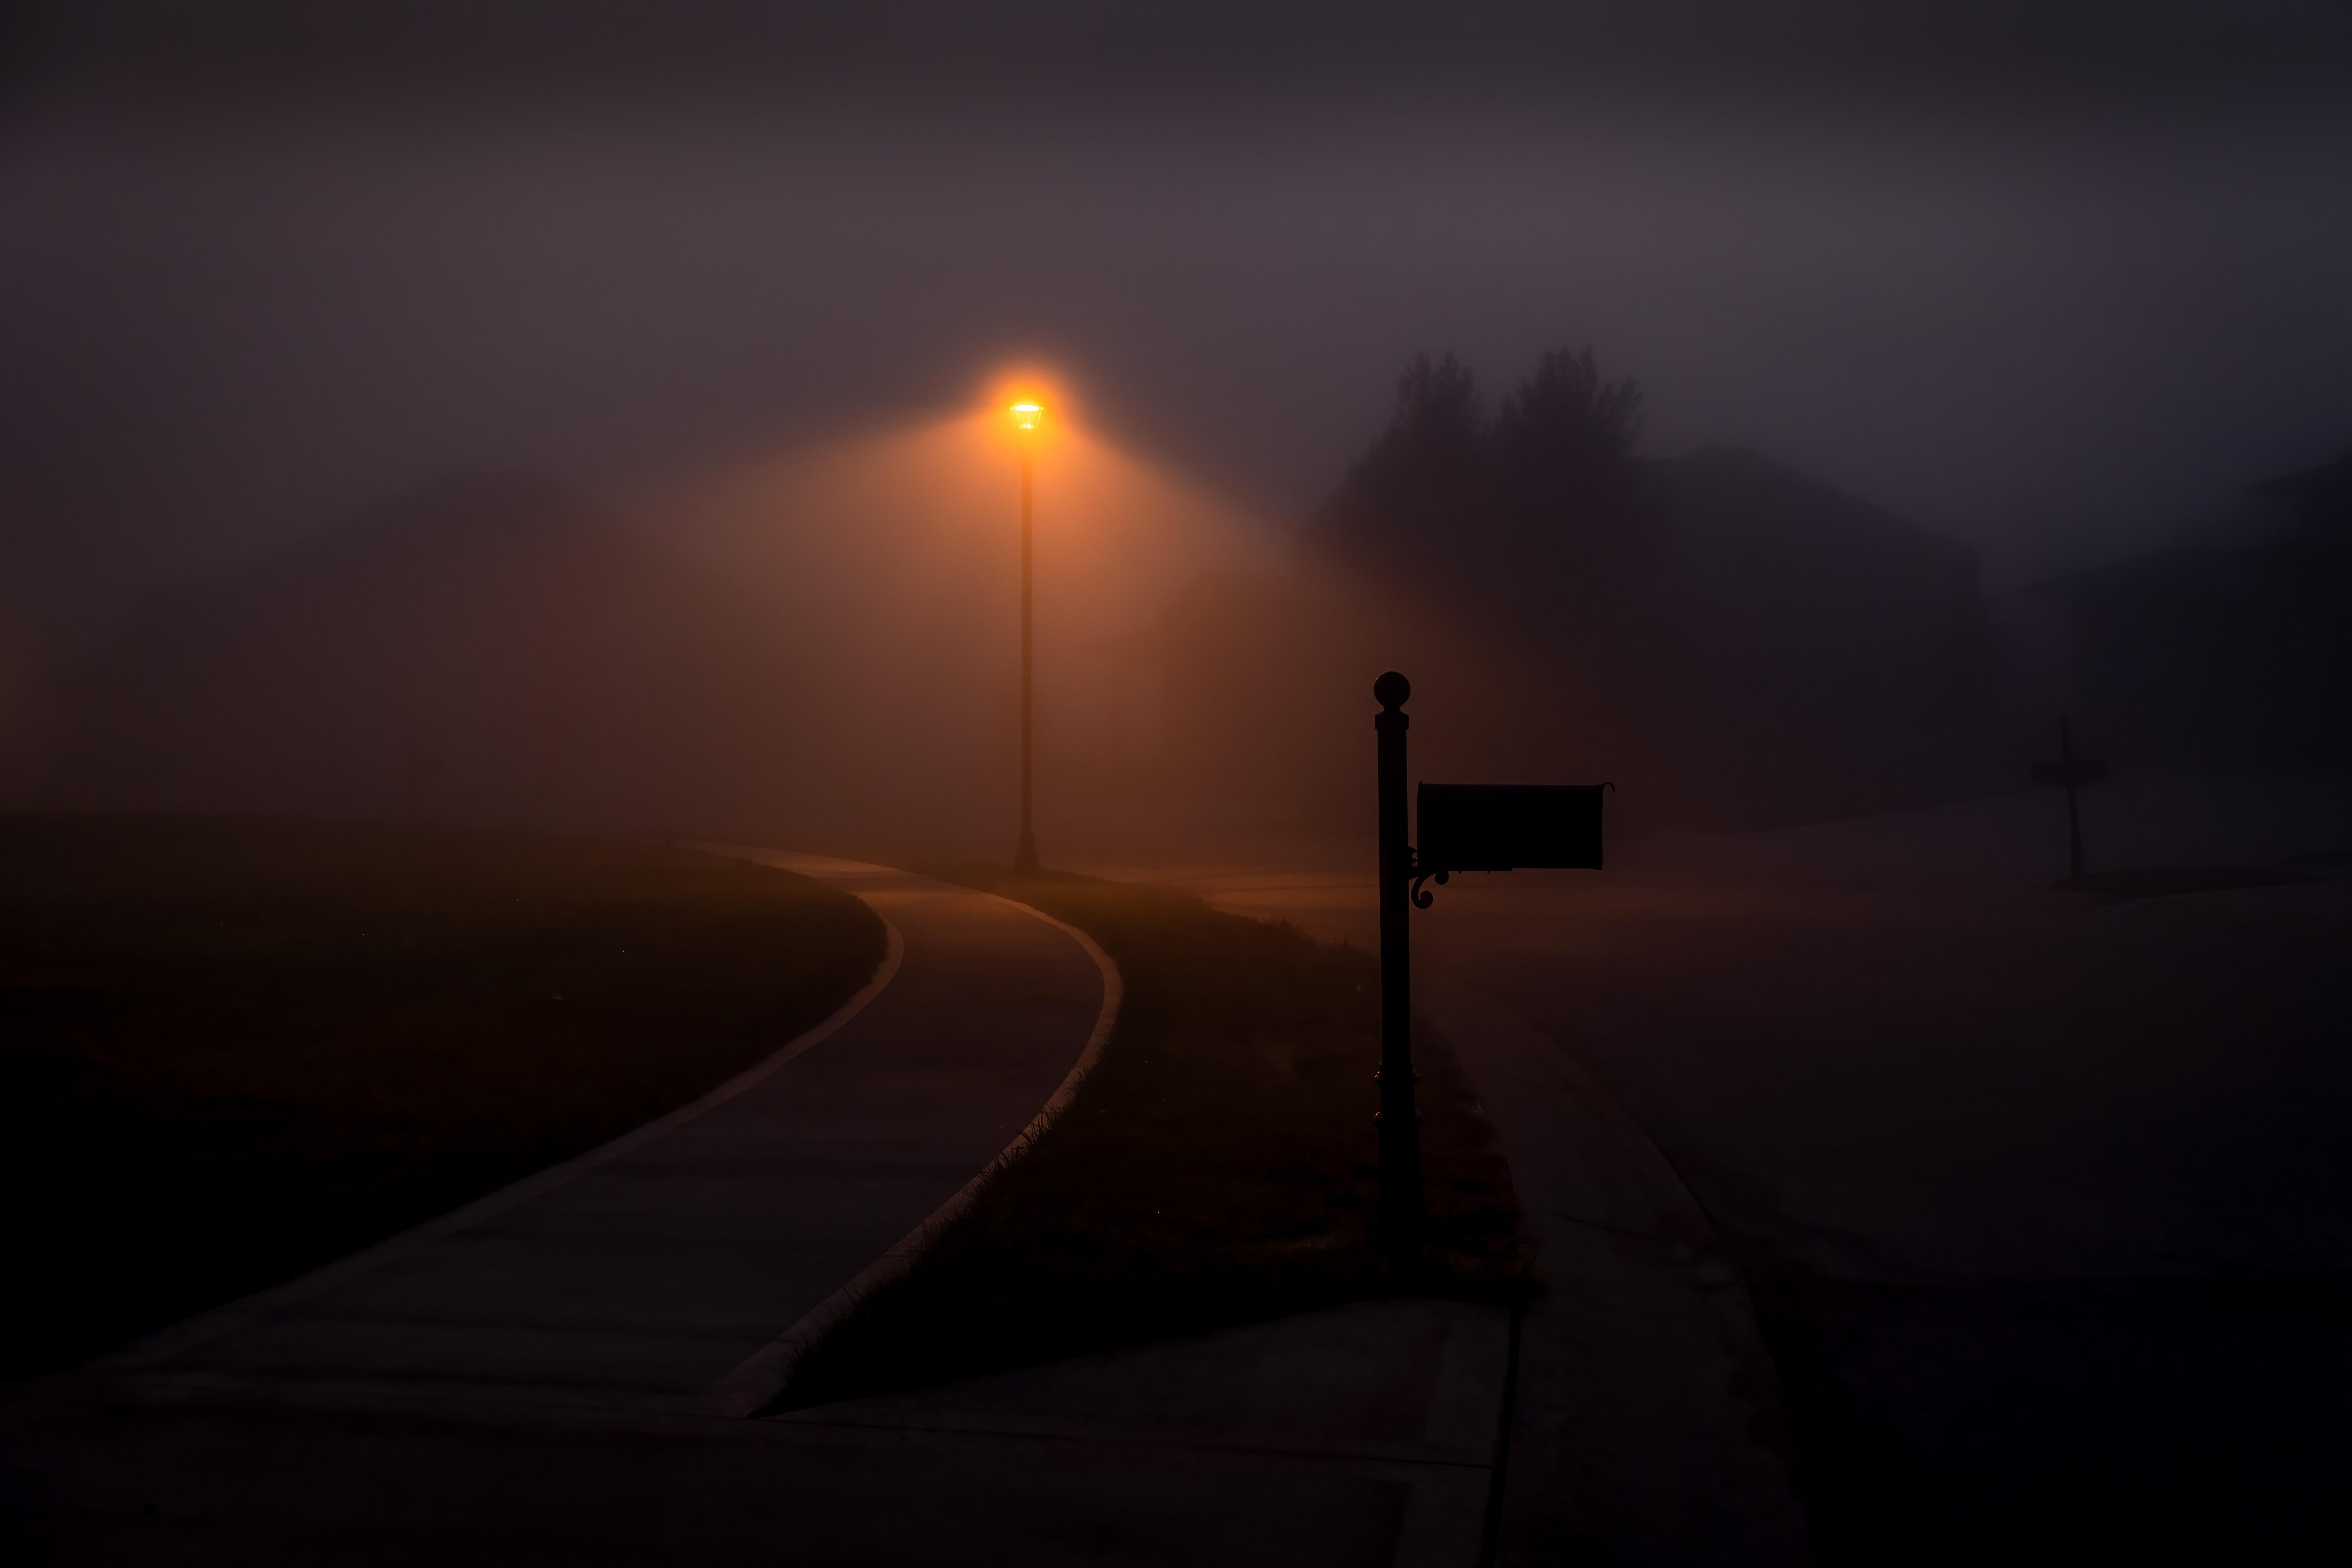 Morning Fog Mailbox - Photograph by Nick Vedros